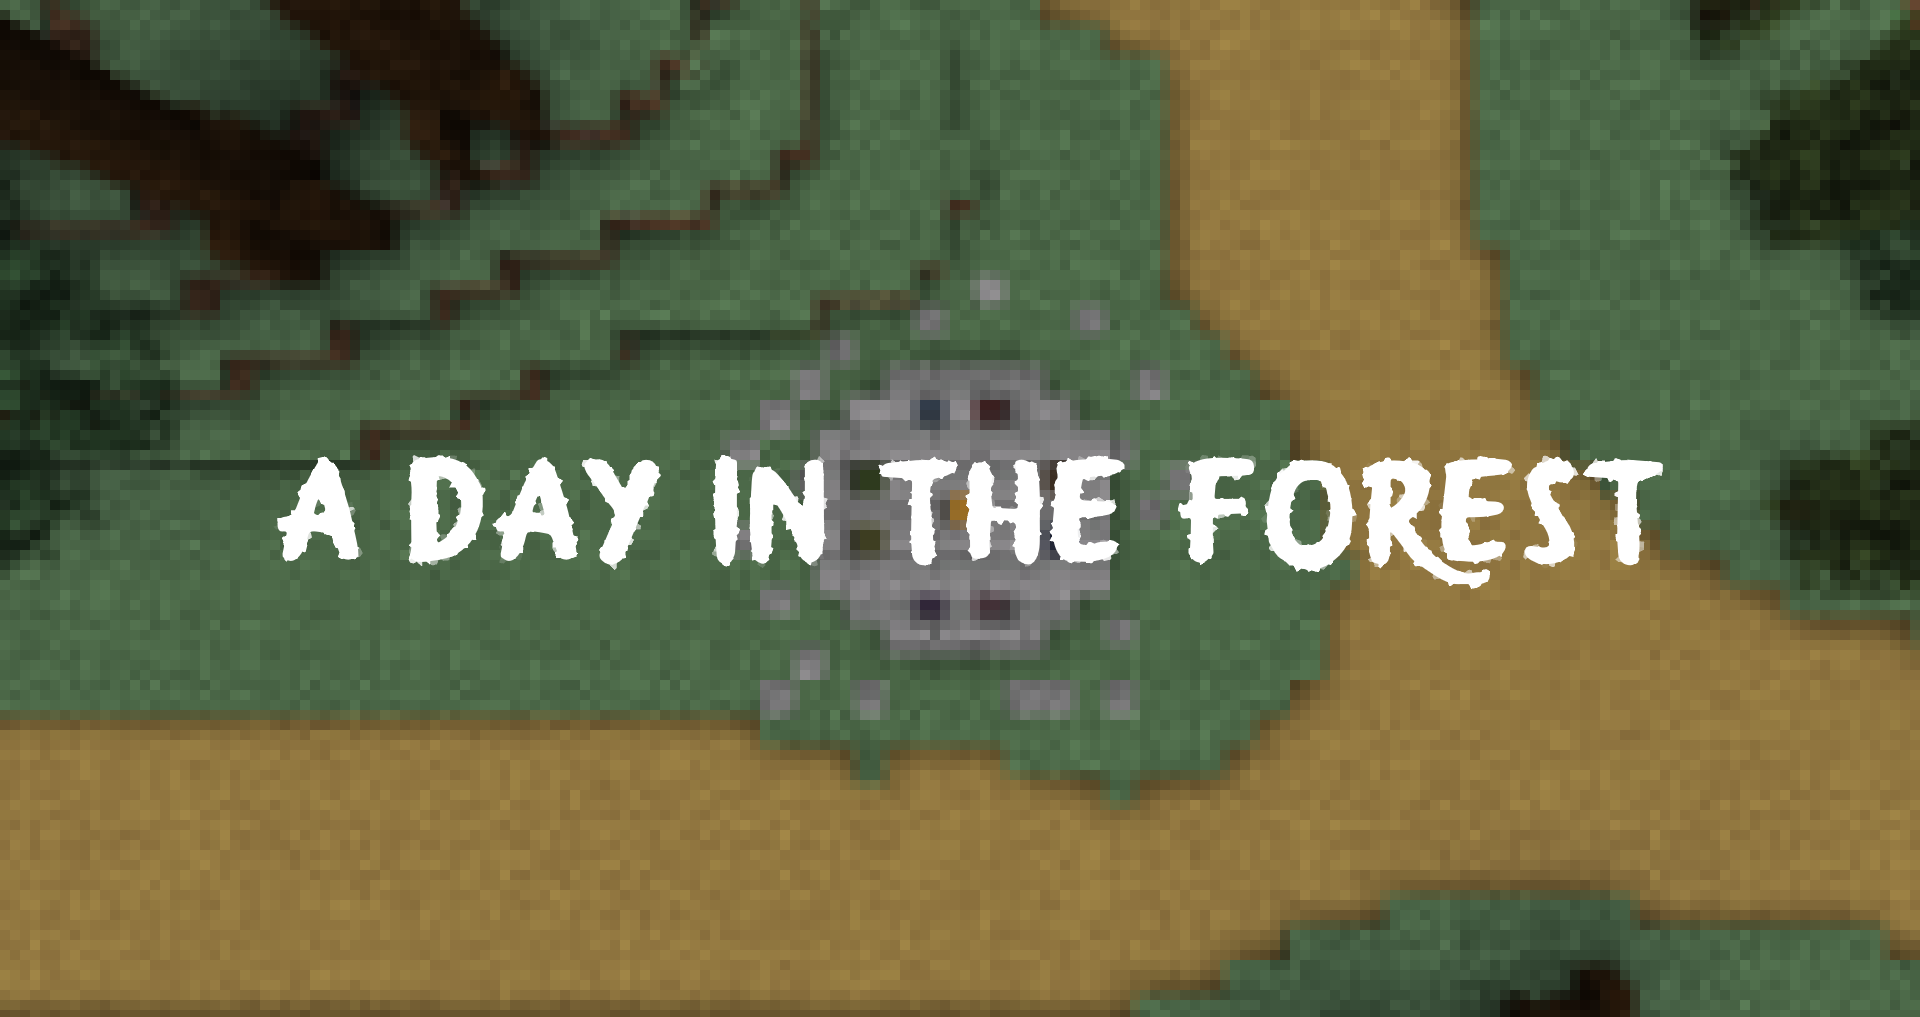 Télécharger A Day in the Forest pour Minecraft 1.15.2